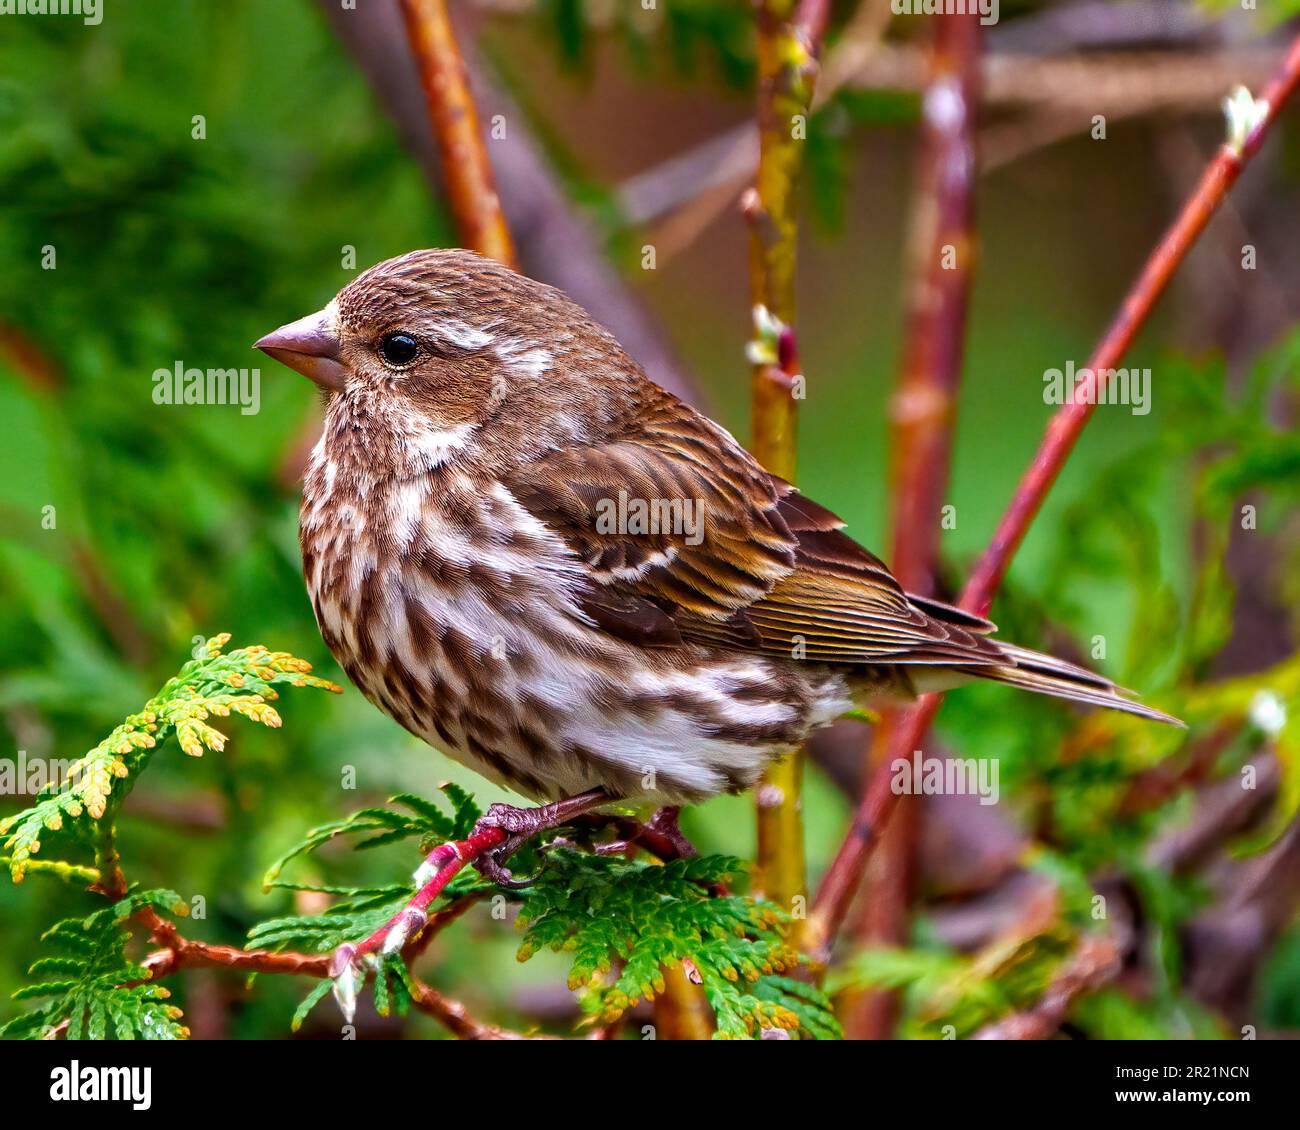 Song Sparrow close-up side view perched on a cedar branch with green blur background in its environment and habitat, displaying brown feather. Sparrow Stock Photo